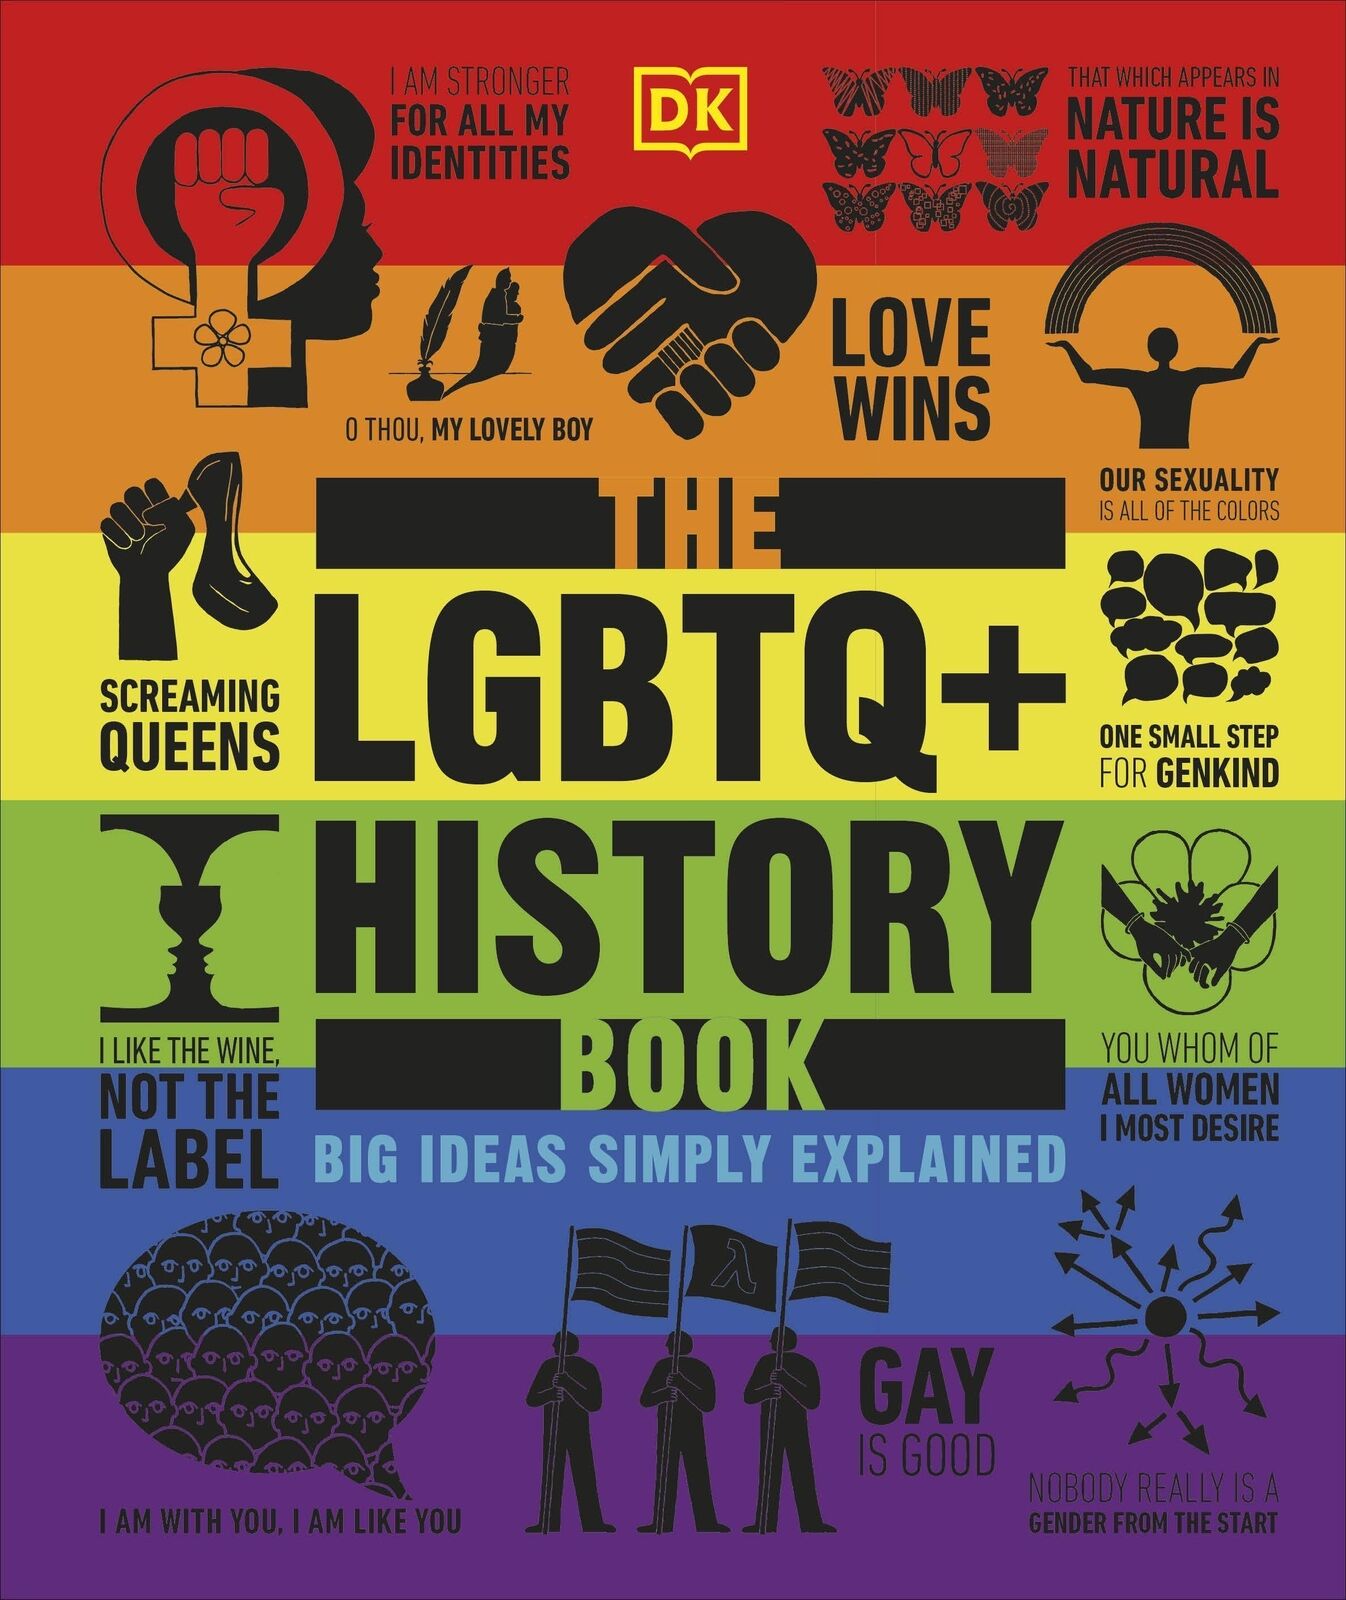 Cover of the book "The LGBTQ+ History Book" by DK